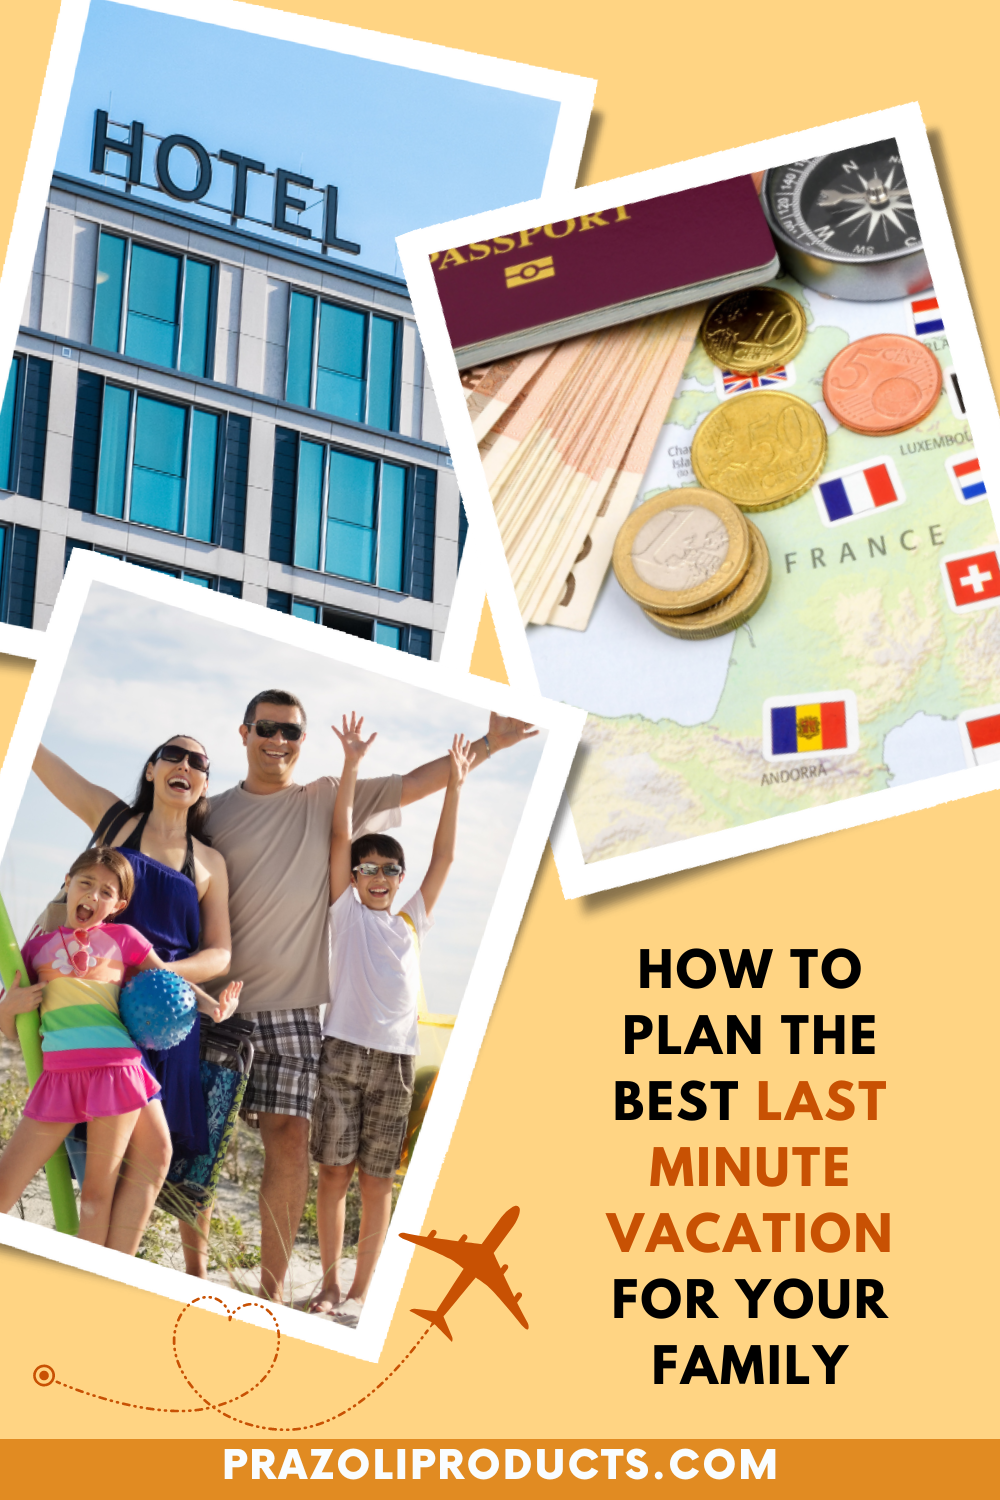 How-To-Plan-The-Best-Last-Minute-Vacation-For-Your-Family